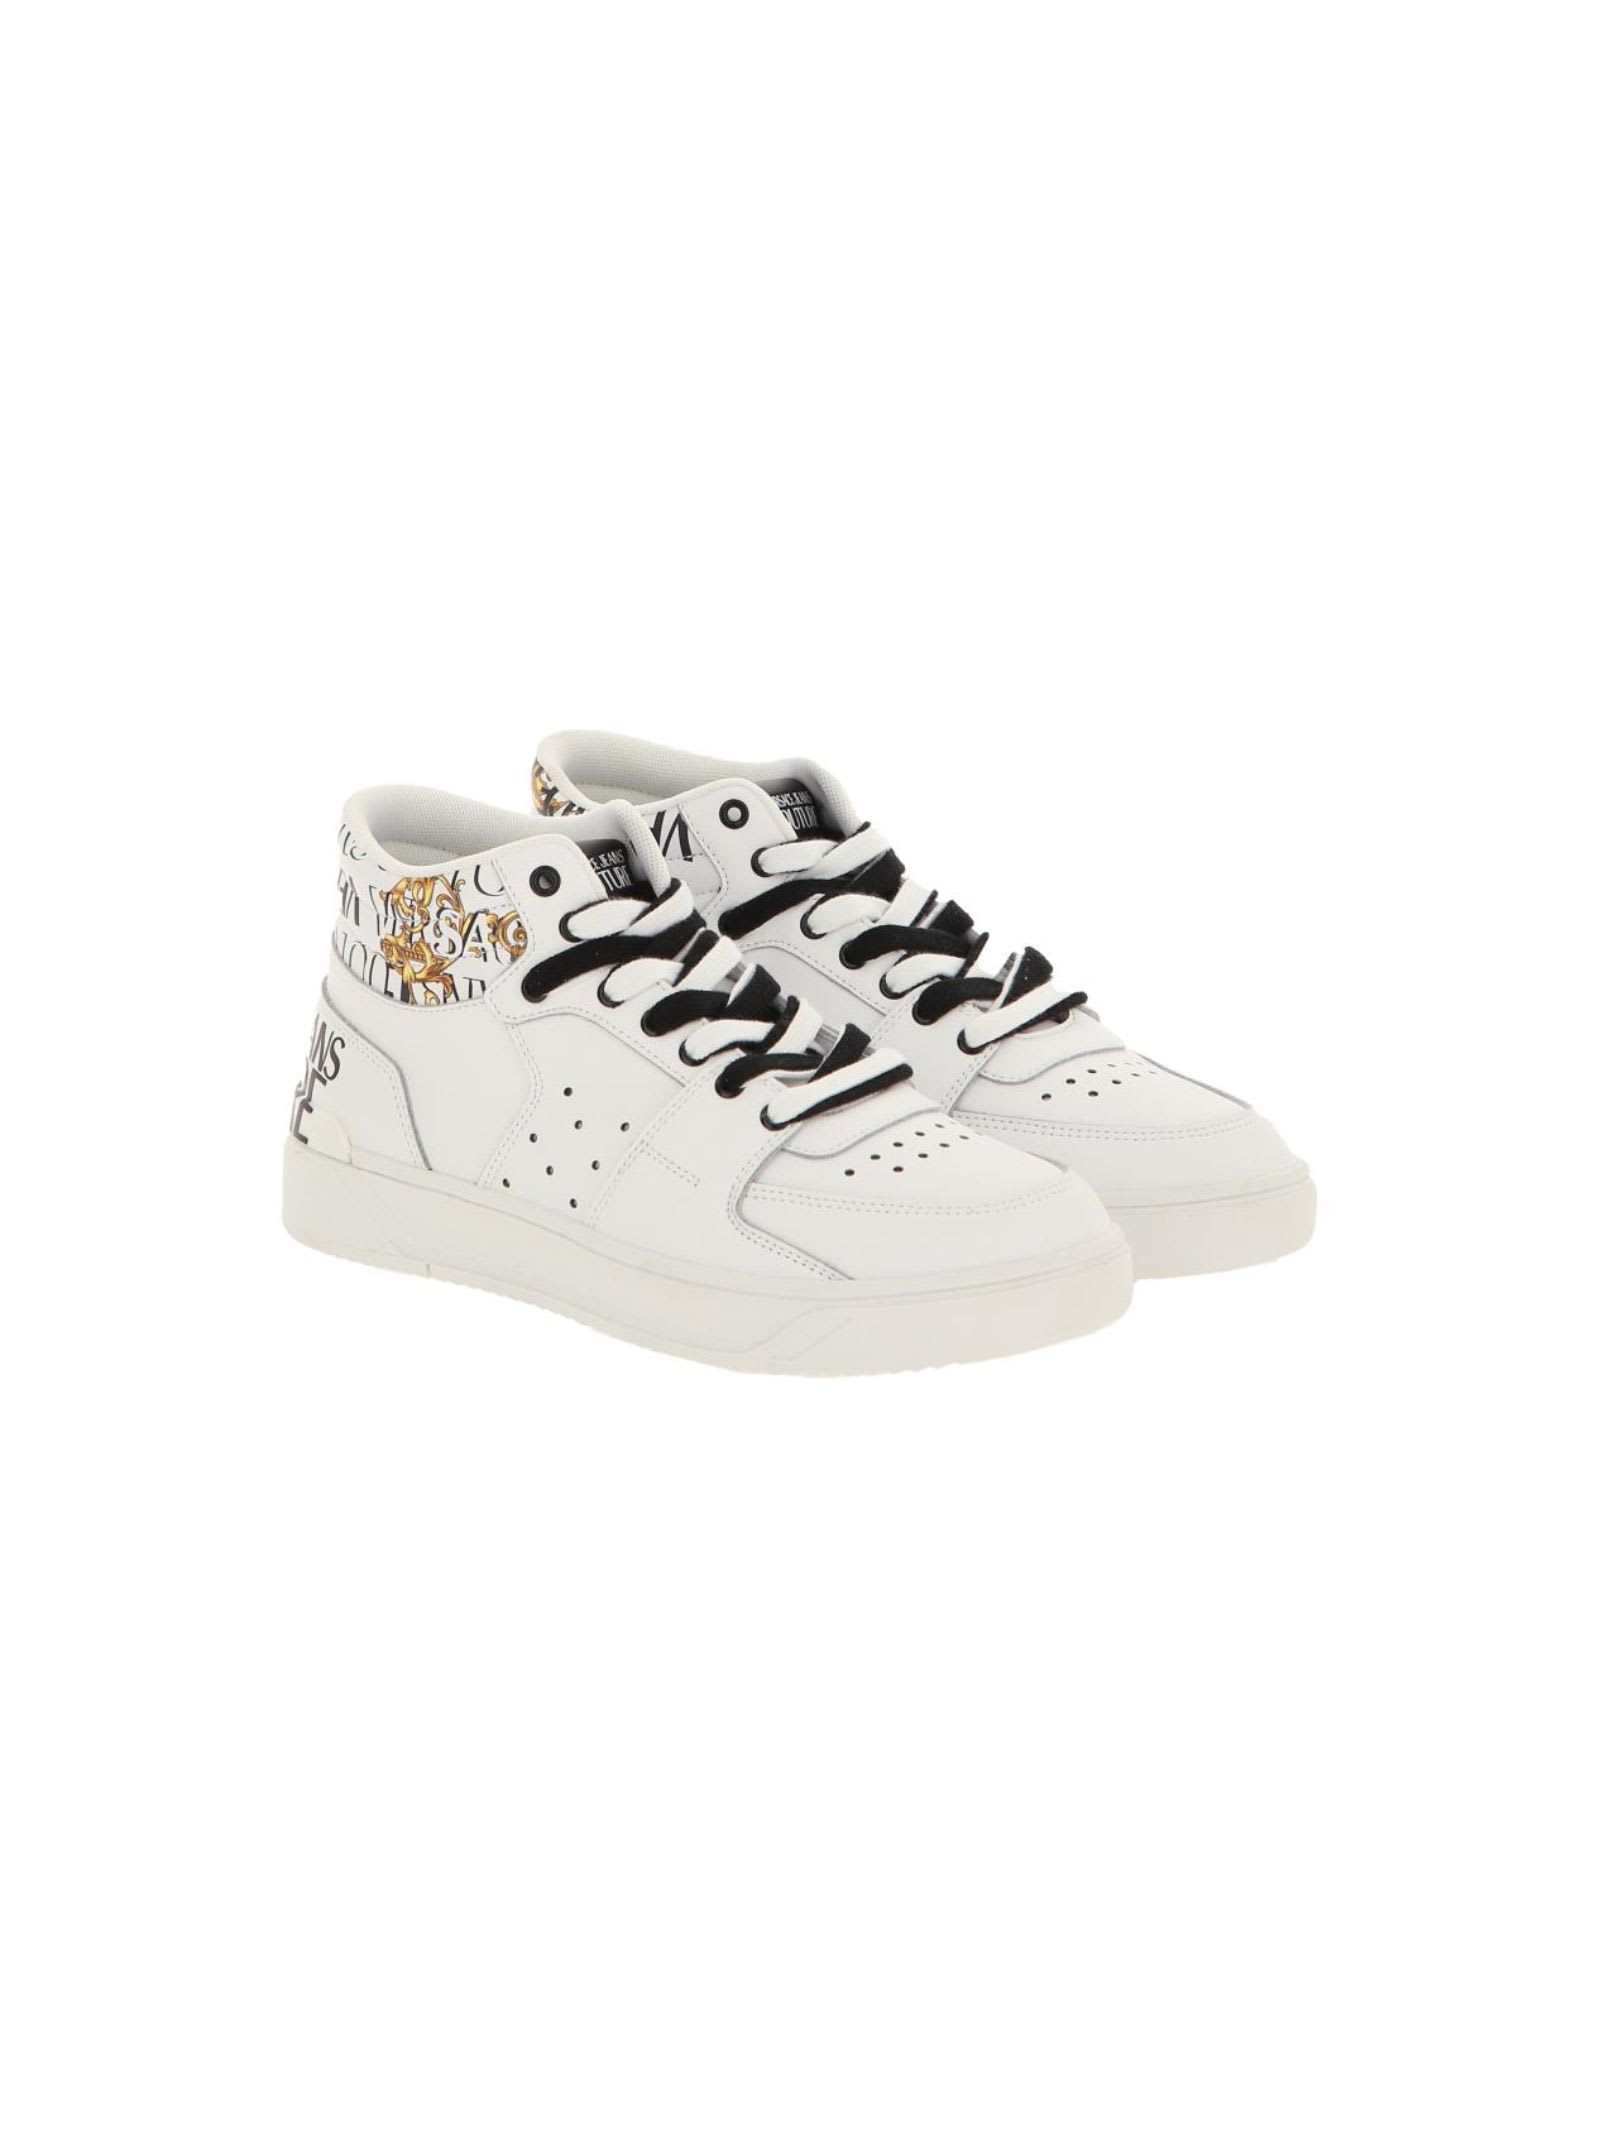 Versace Jeans Couture Shoes In White/gold